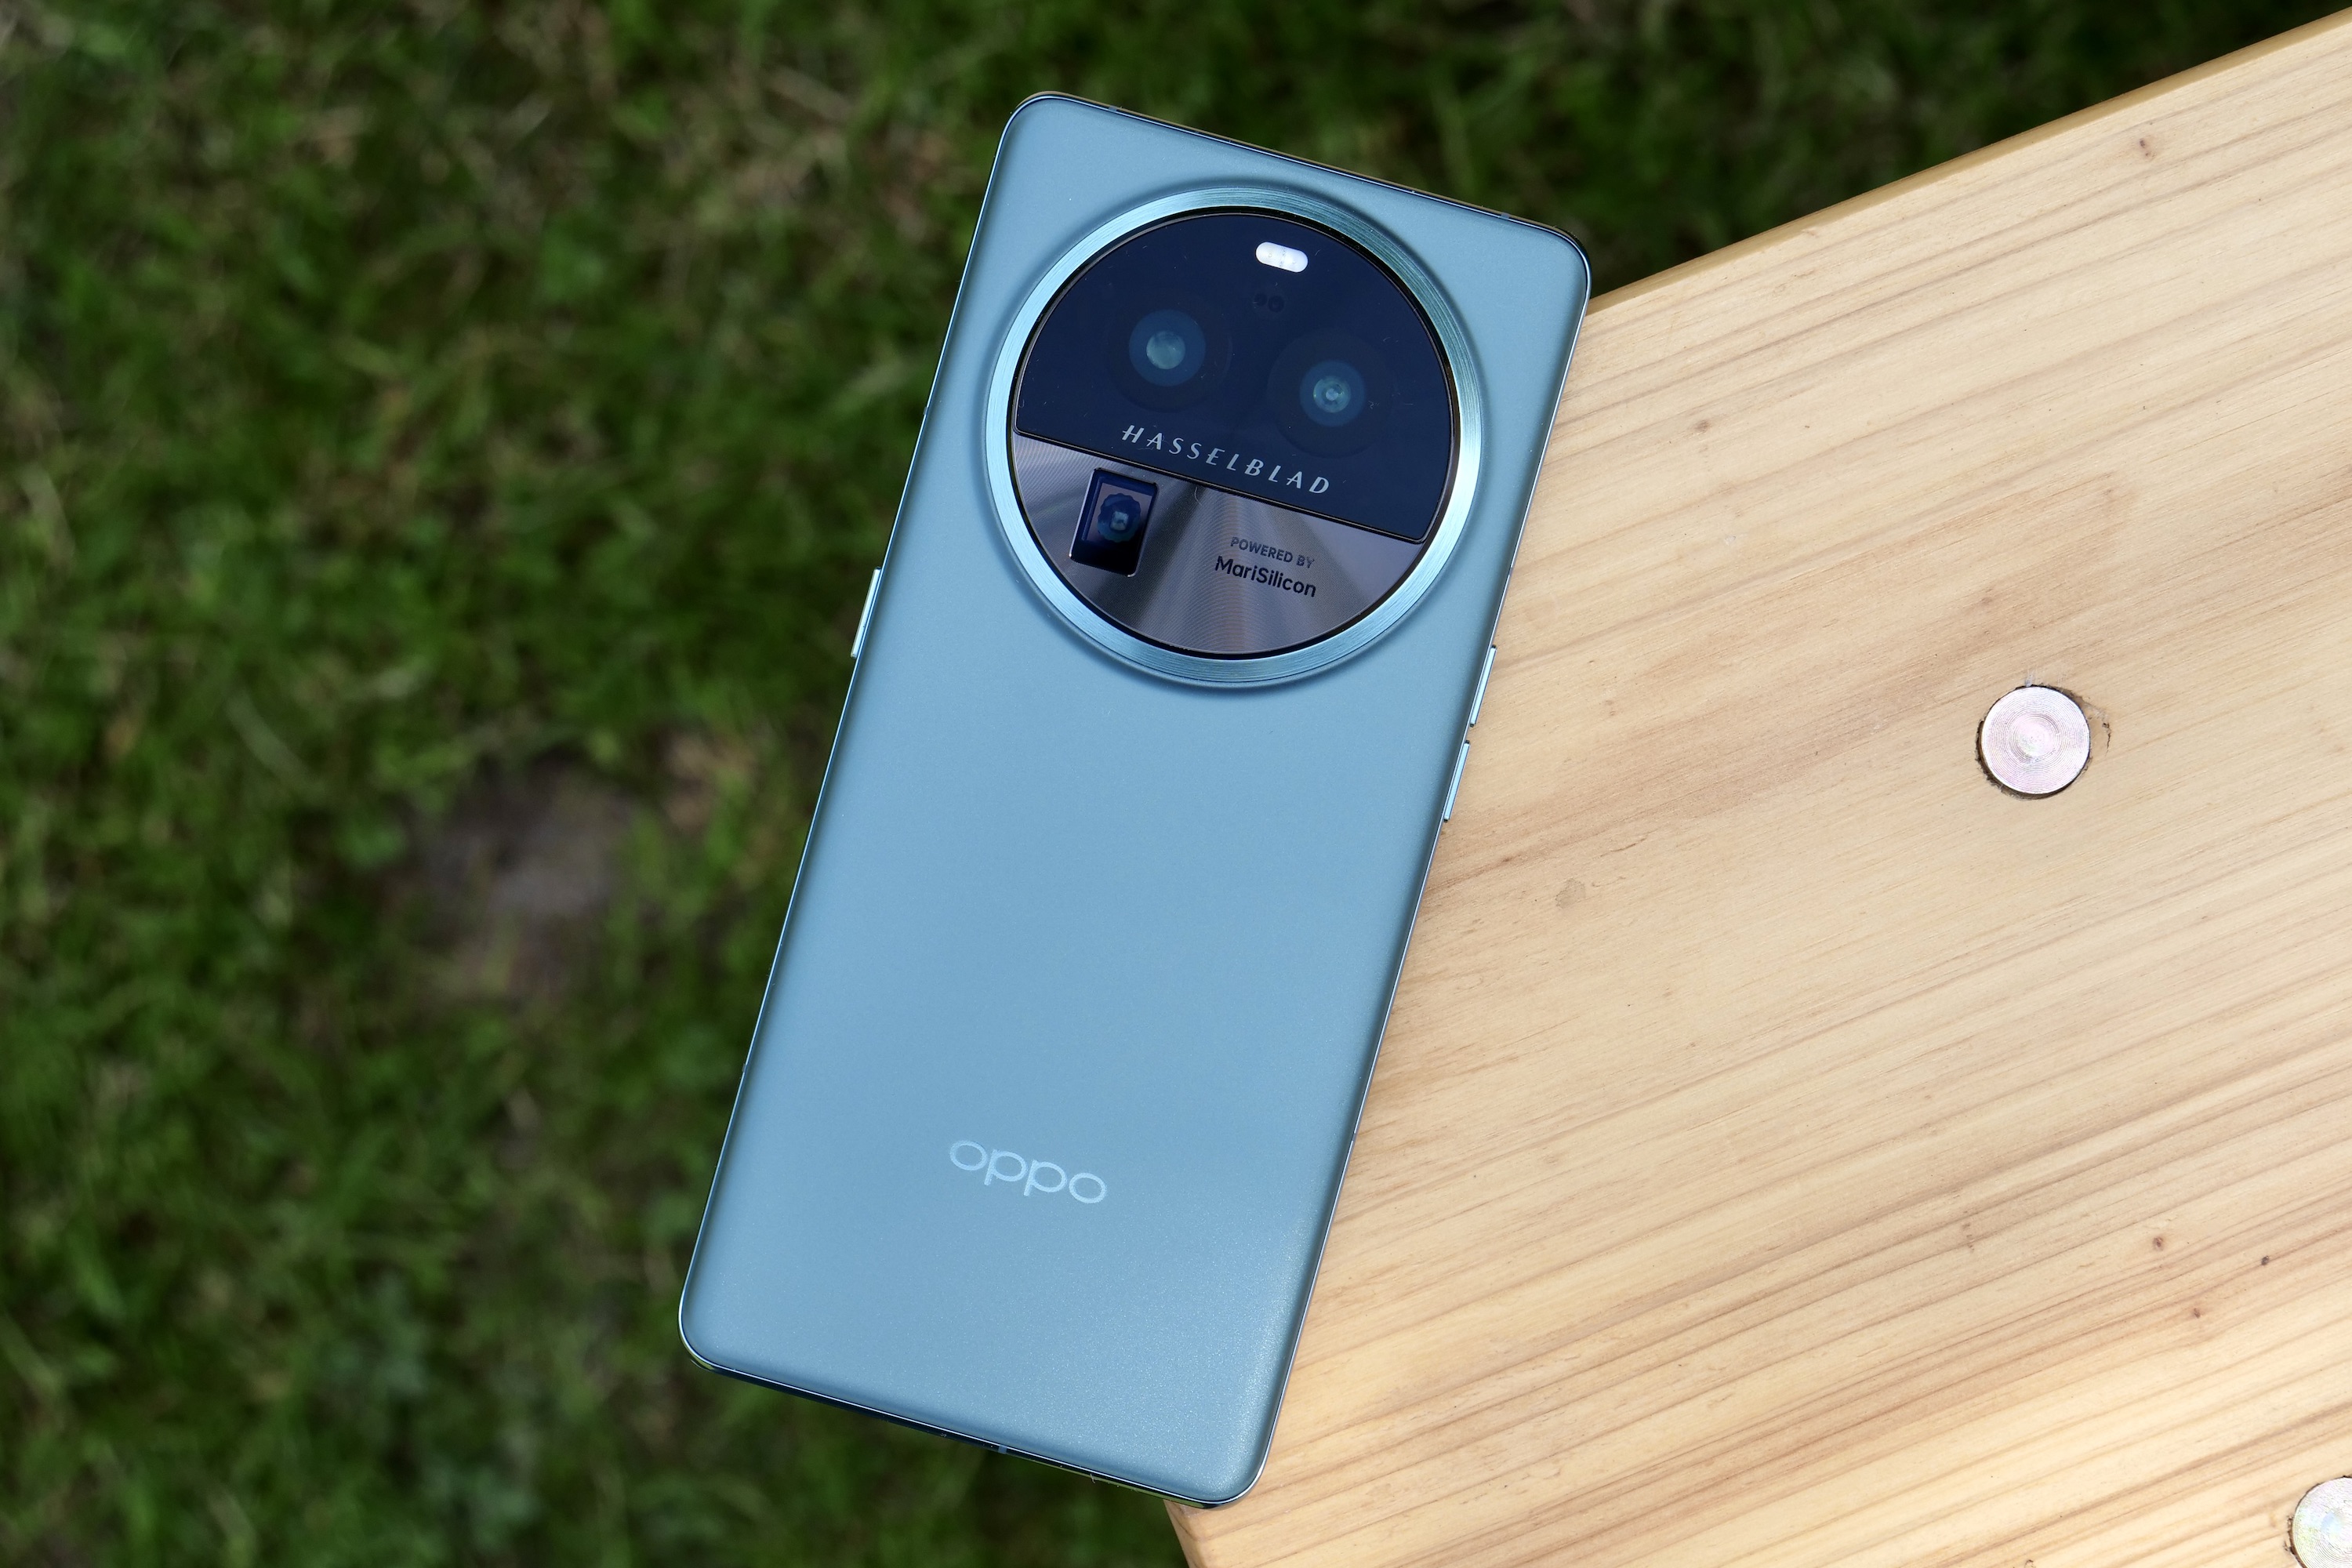 Oppo Says Its Find X6 Pro Phone Doesn't Have a Main Camera - CNET